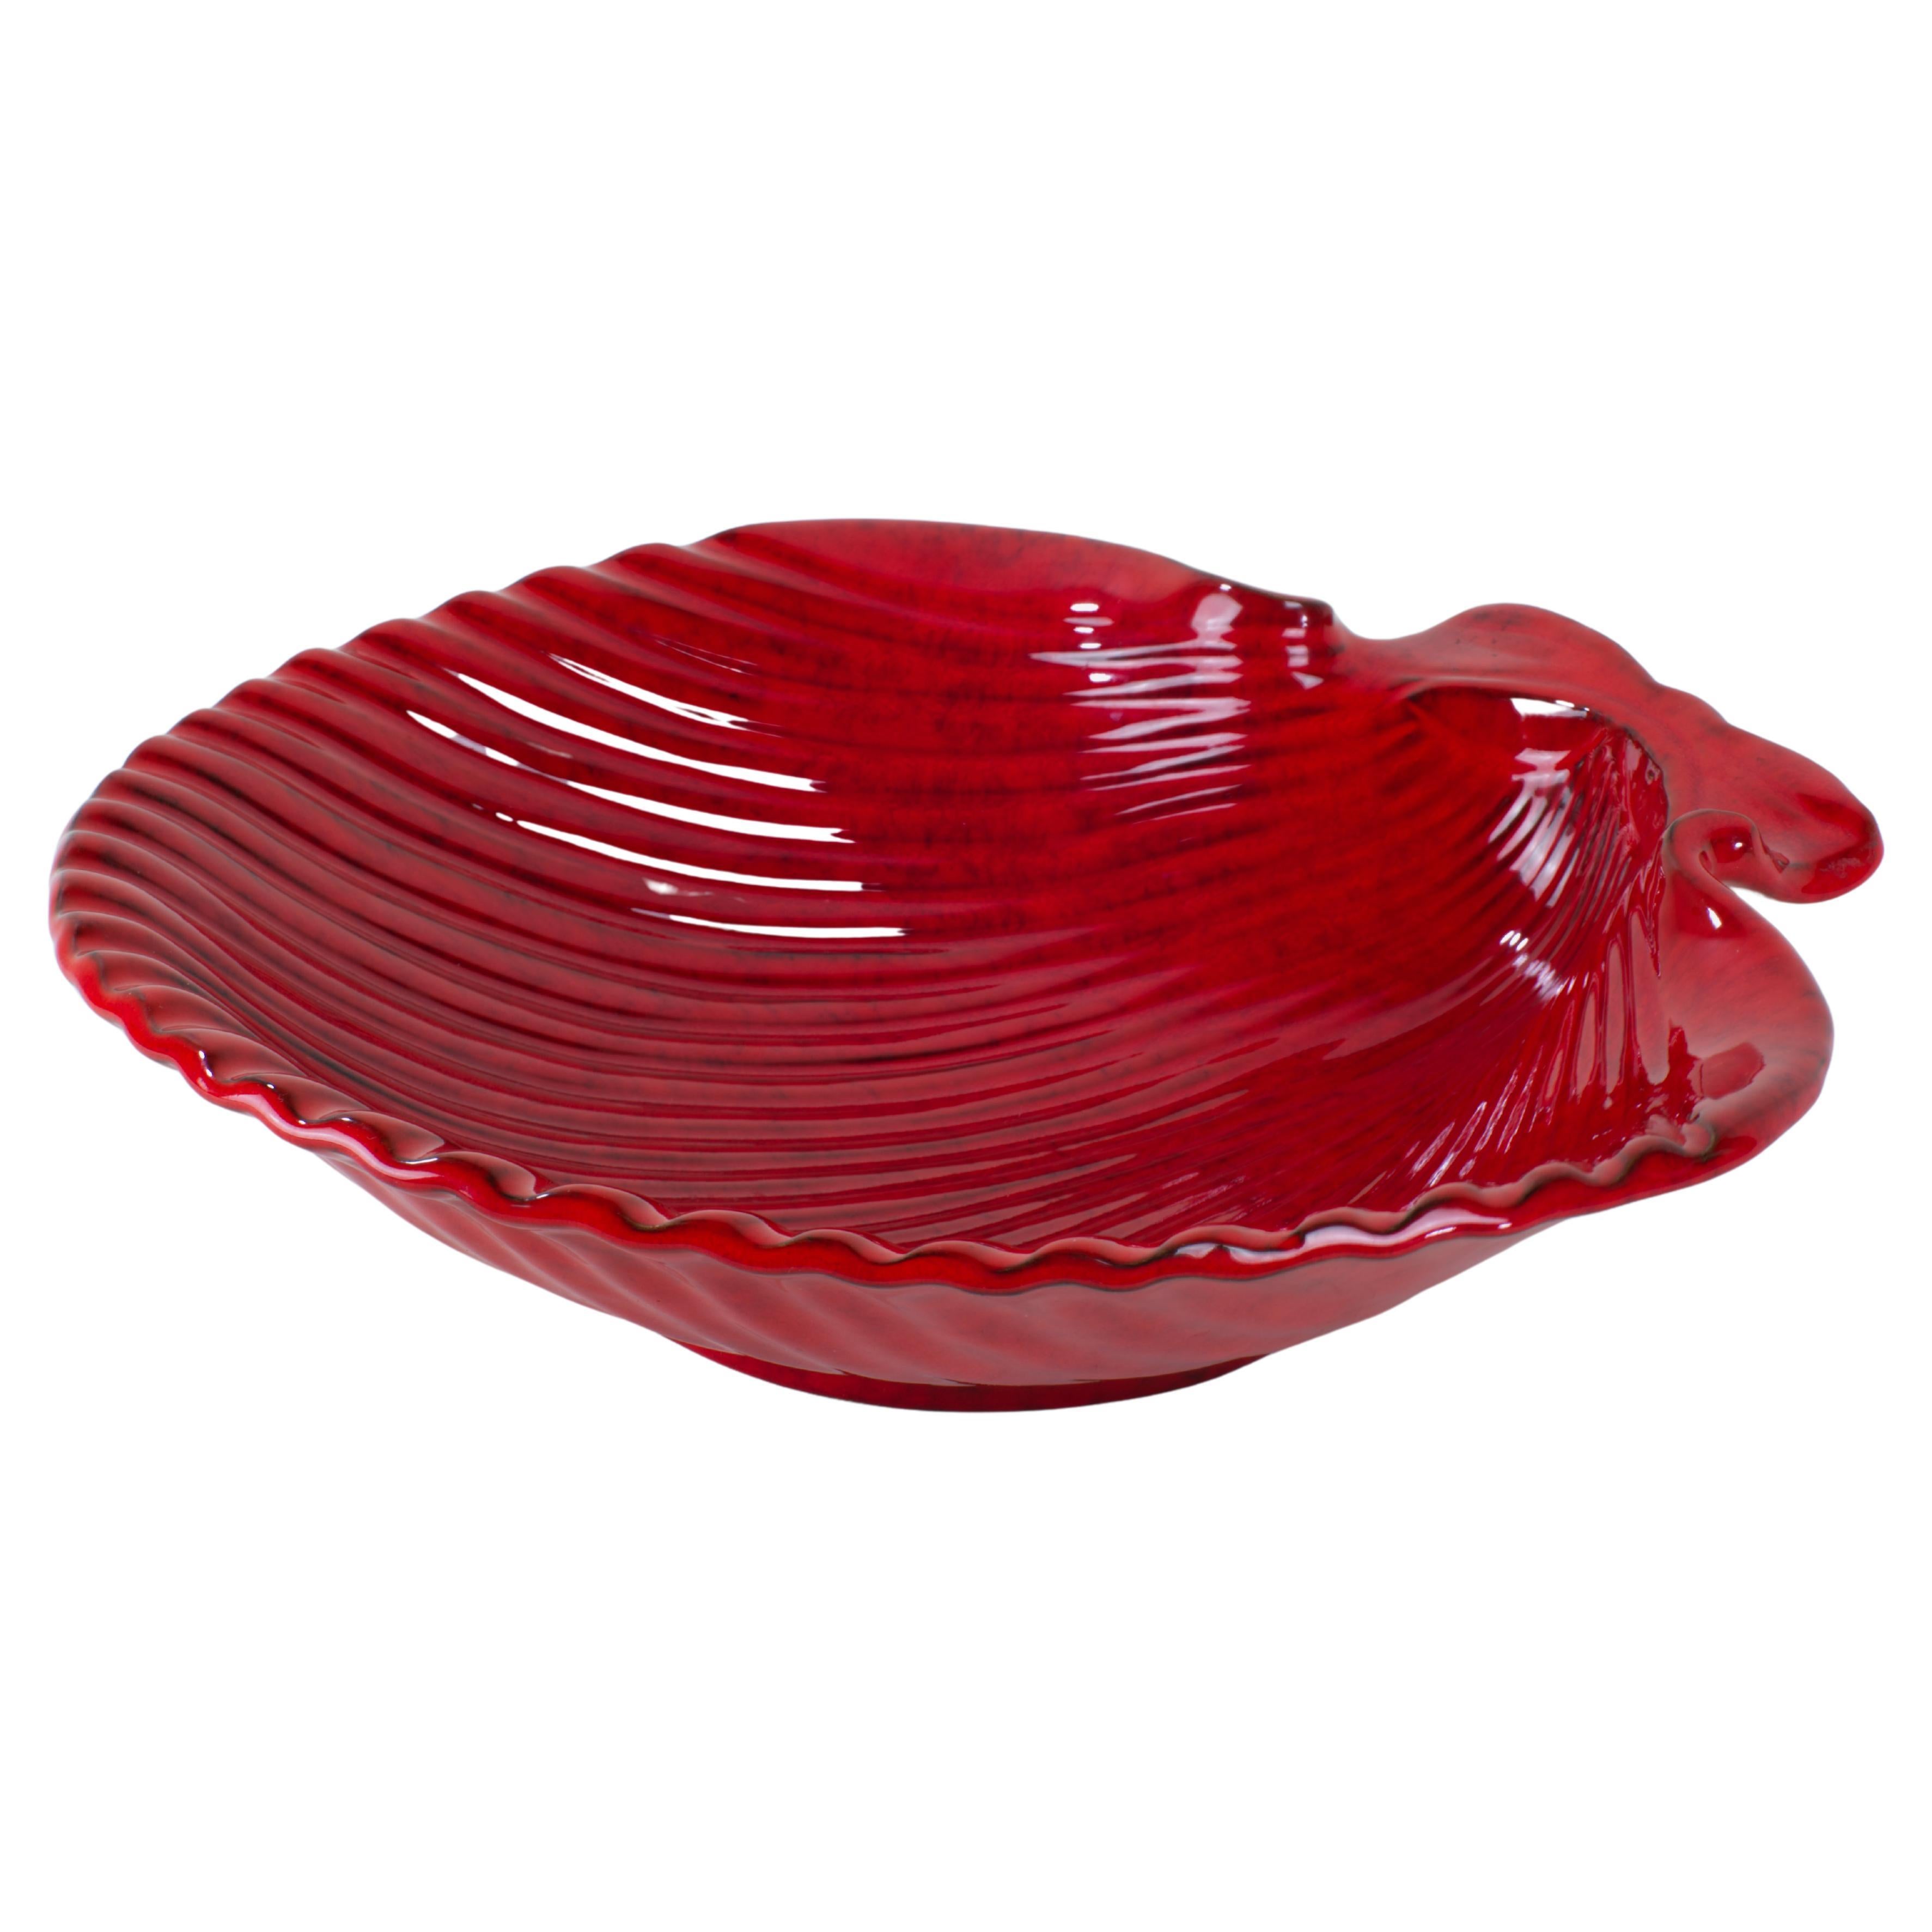 Bitossi for Peasant Village PV Large Shell-shaped bowl, Ceramics, Red Glaze For Sale